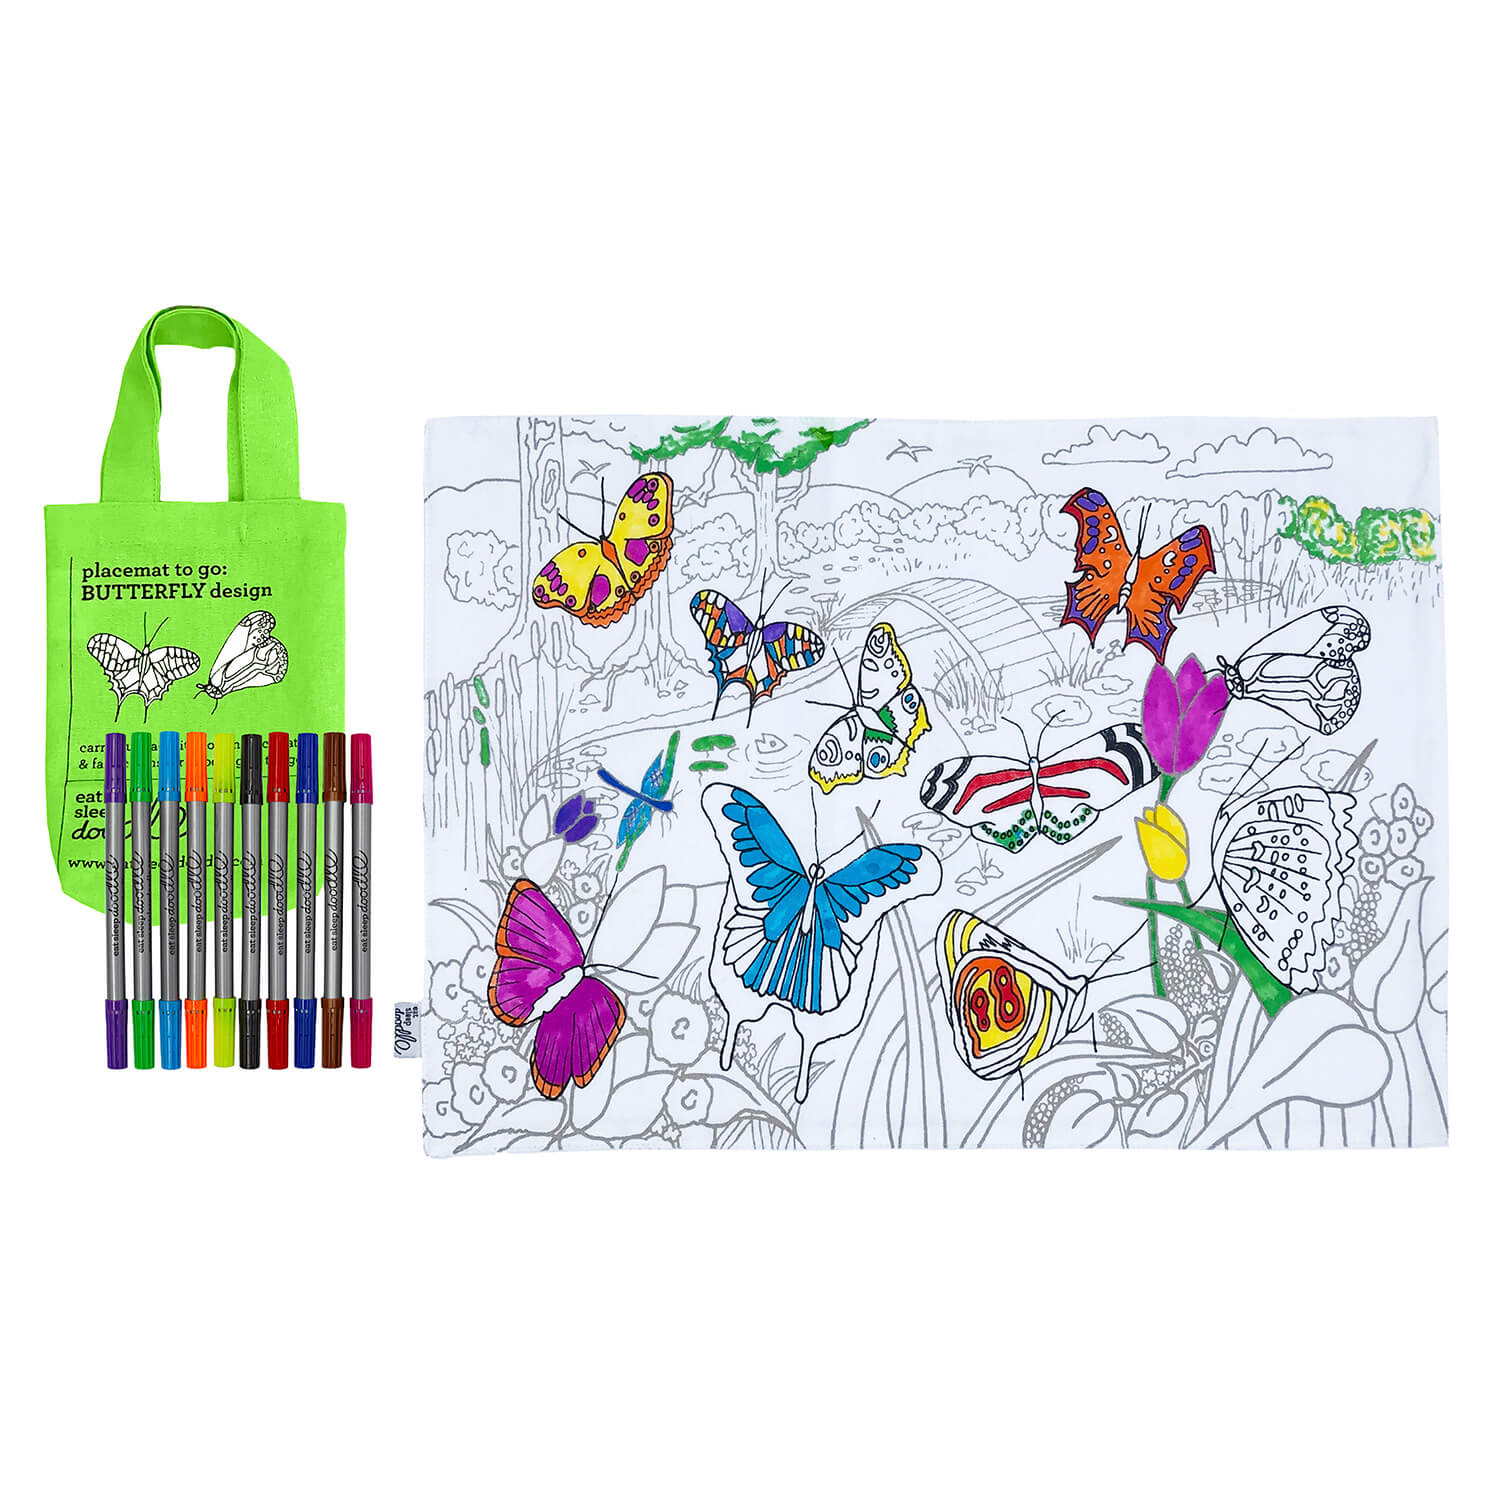 Eat Sleep Doodle Butterfly Placemat - White 1 Shaws Department Stores